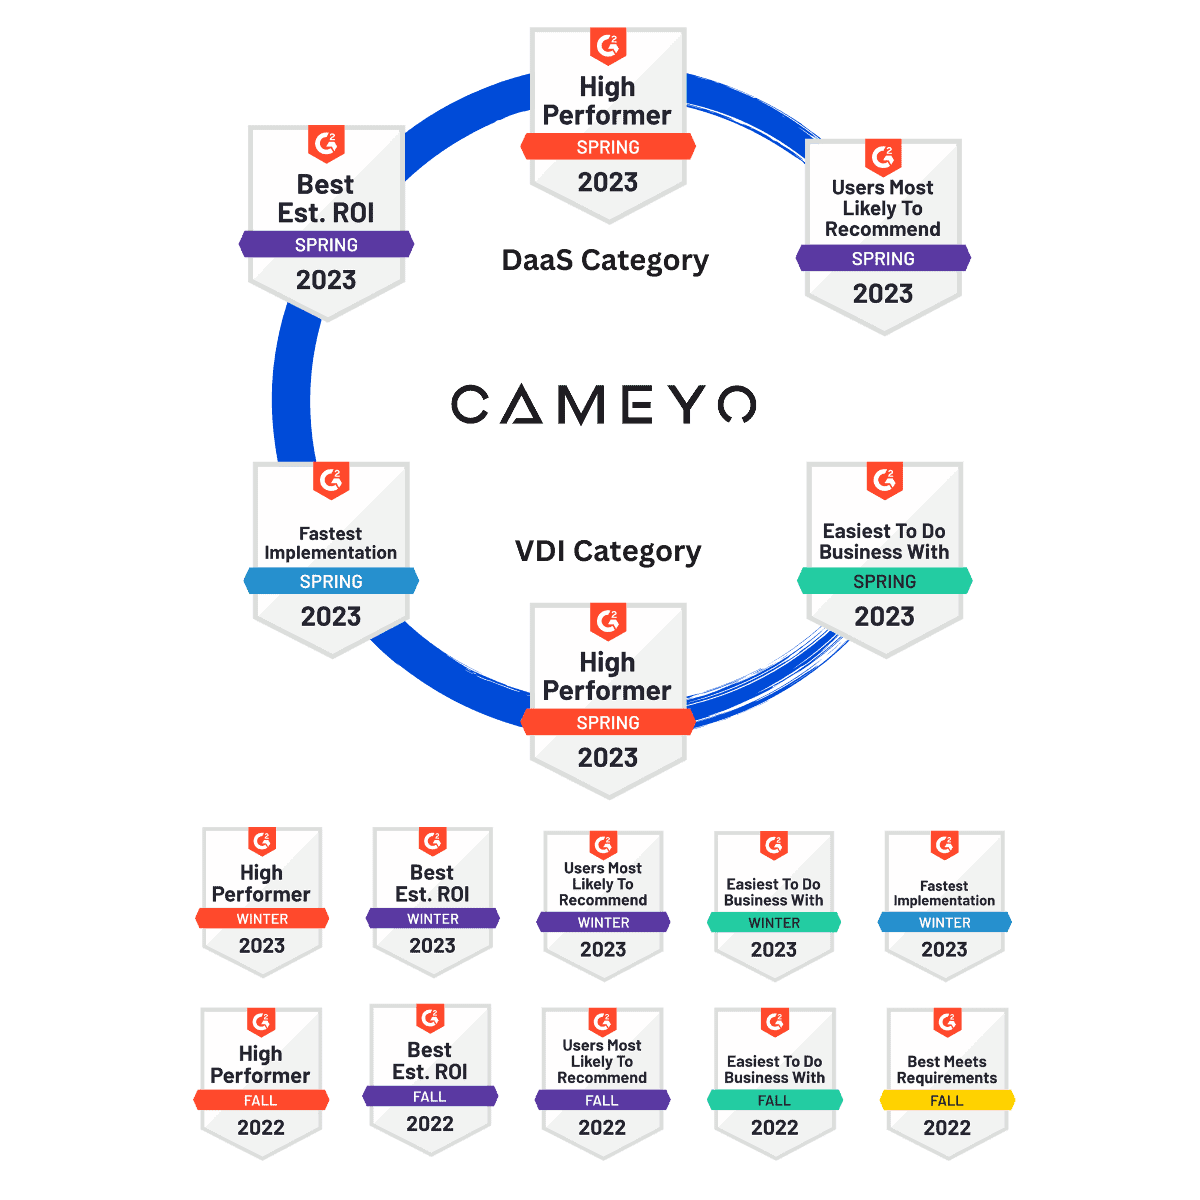 Collection of G2 badges showing customer rankings for Cameyo in the VDI and DaaS categories